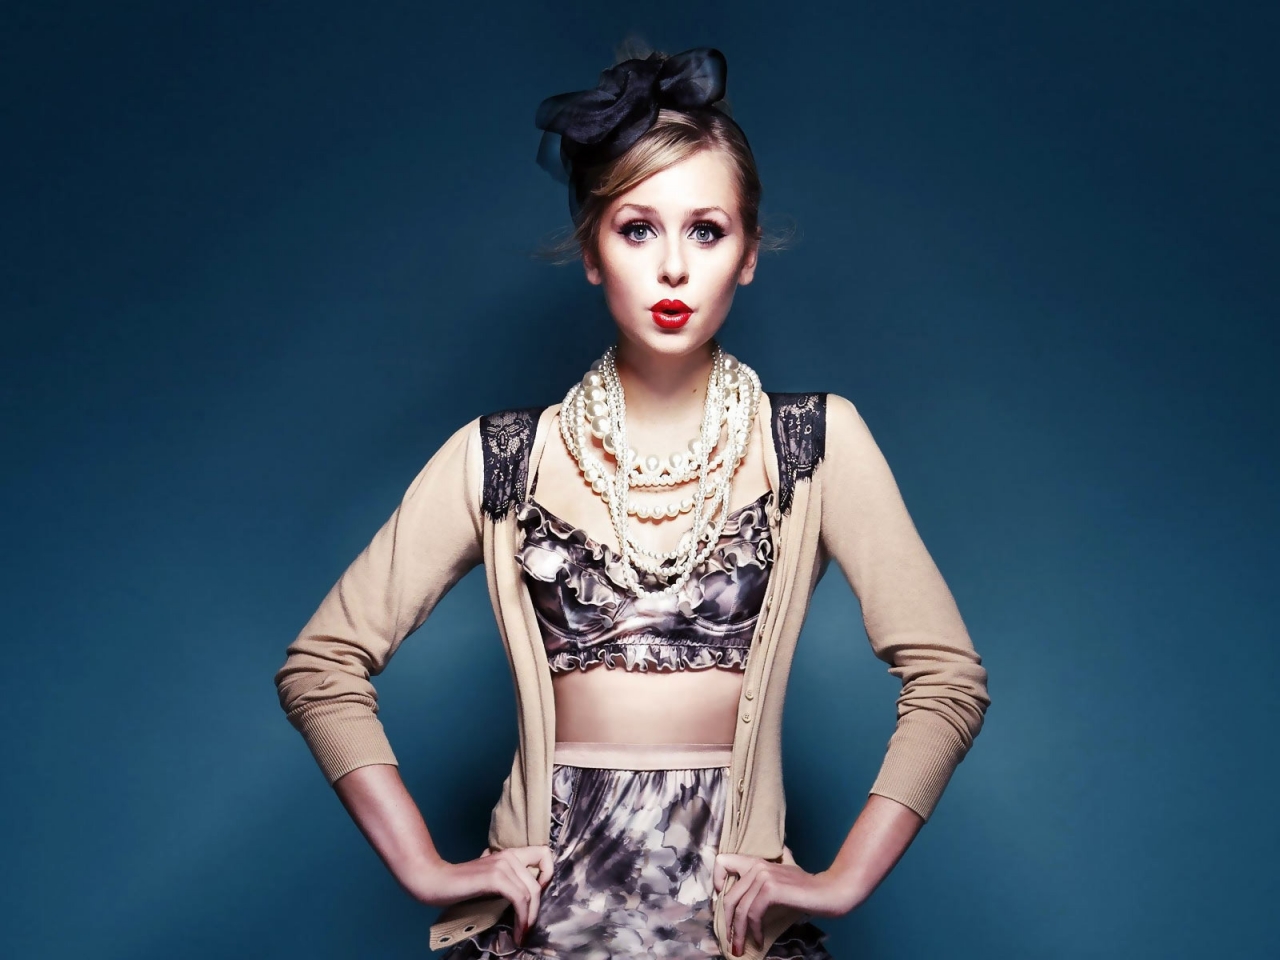 Diana Vickers for 1280 x 960 resolution